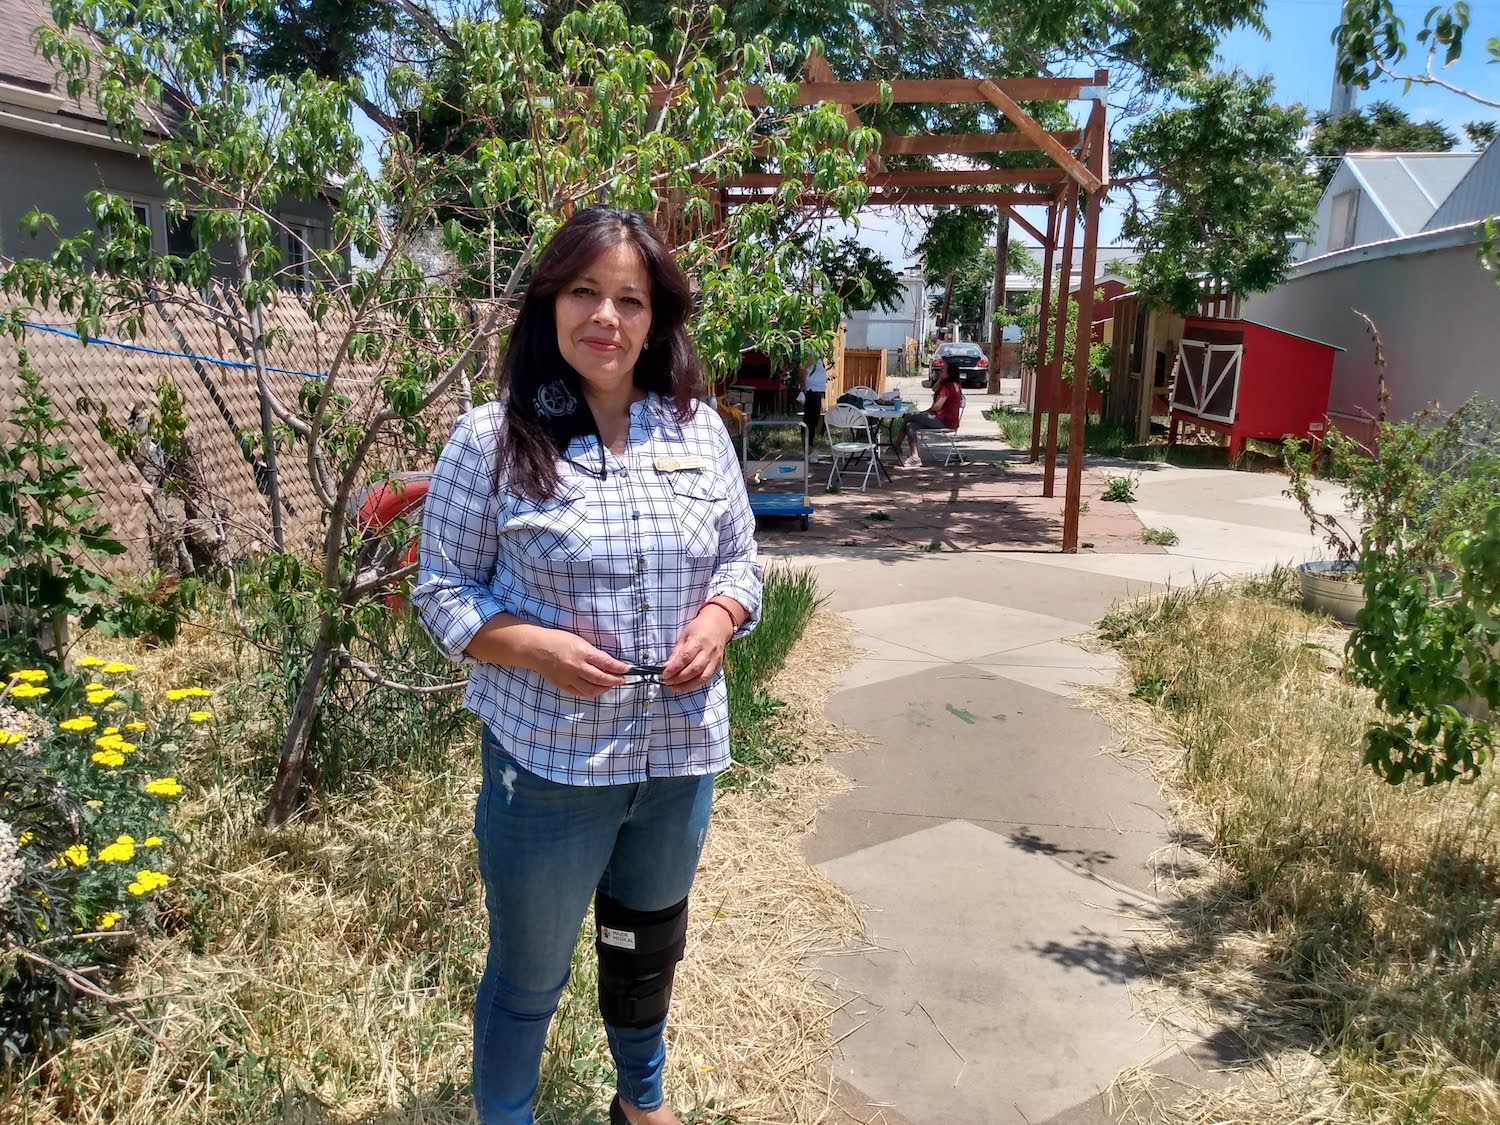 Guadalupe Rodriguez, a Growhaus promotora known for helping with cooking classes and meal prep strategies, has been a first line of defense for many north Denver families during the Covid-19 pandemic July 2020